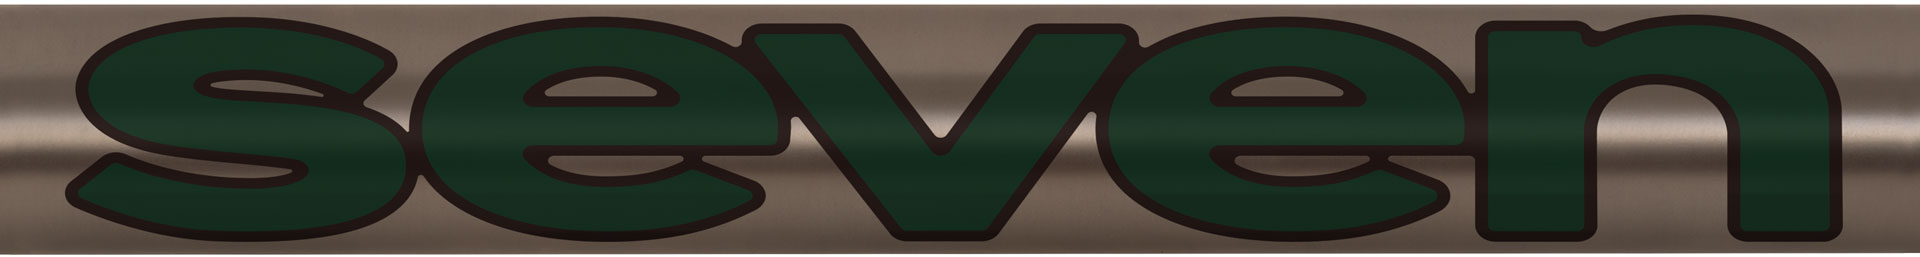 unified down tube graphic in Myrtle Green, Black Coffee outline